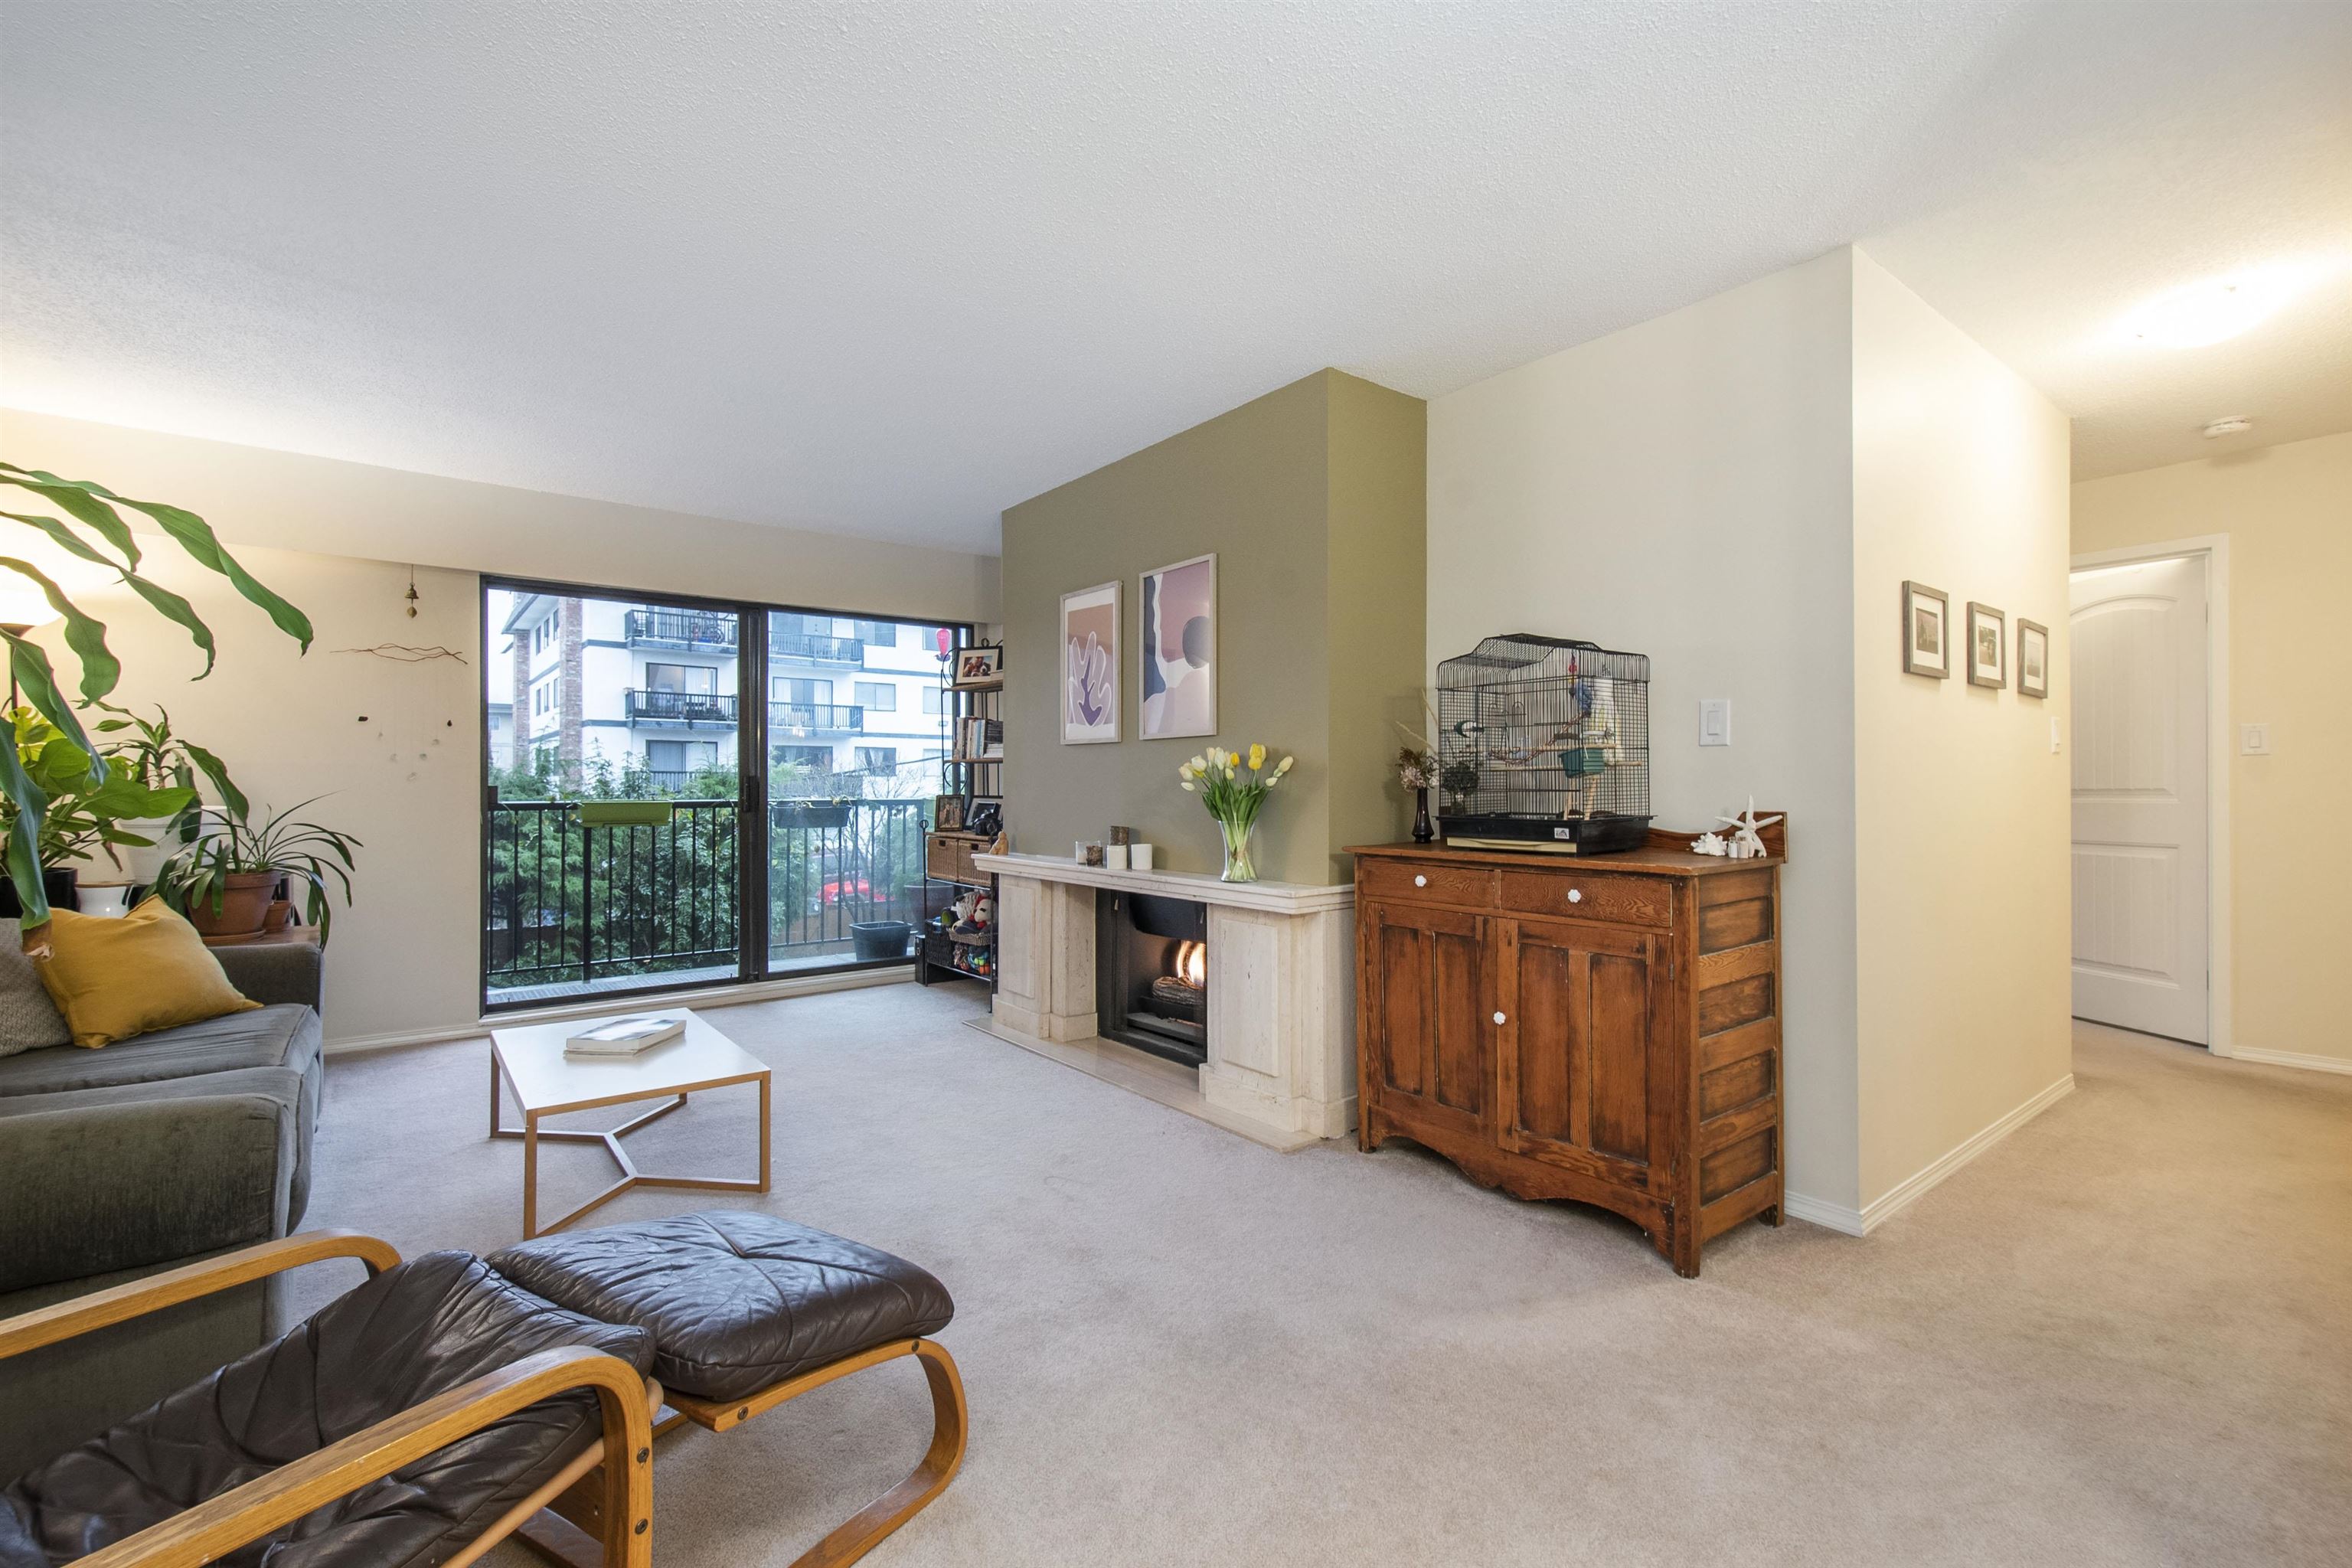 Central Lonsdale Apartment/Condo for sale:  2 bedroom 1,003 sq.ft. (Listed 6400-05-13)